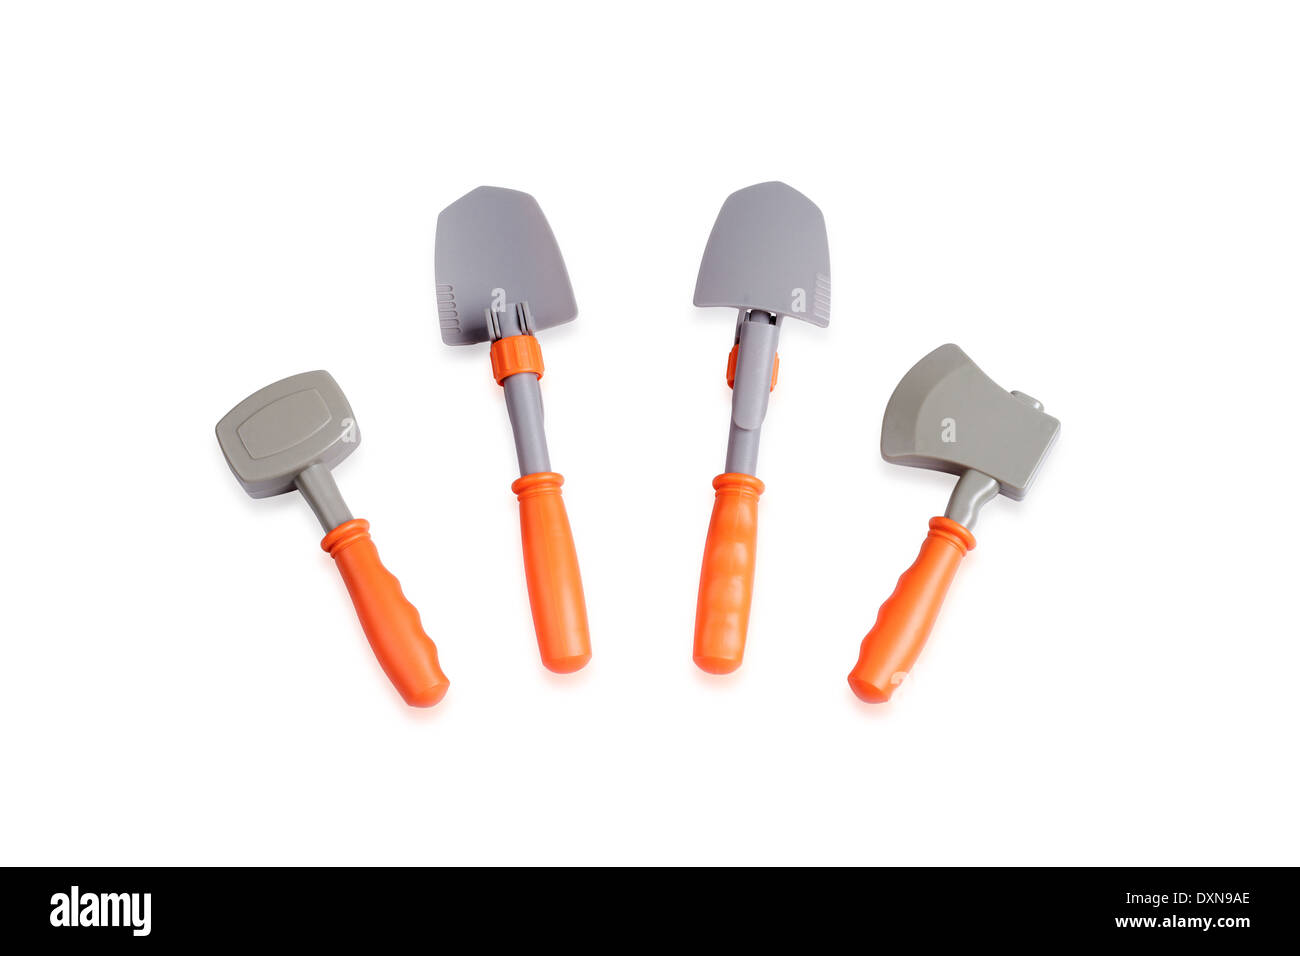 hammer, ax and shovels toy isolated on white background Stock Photo